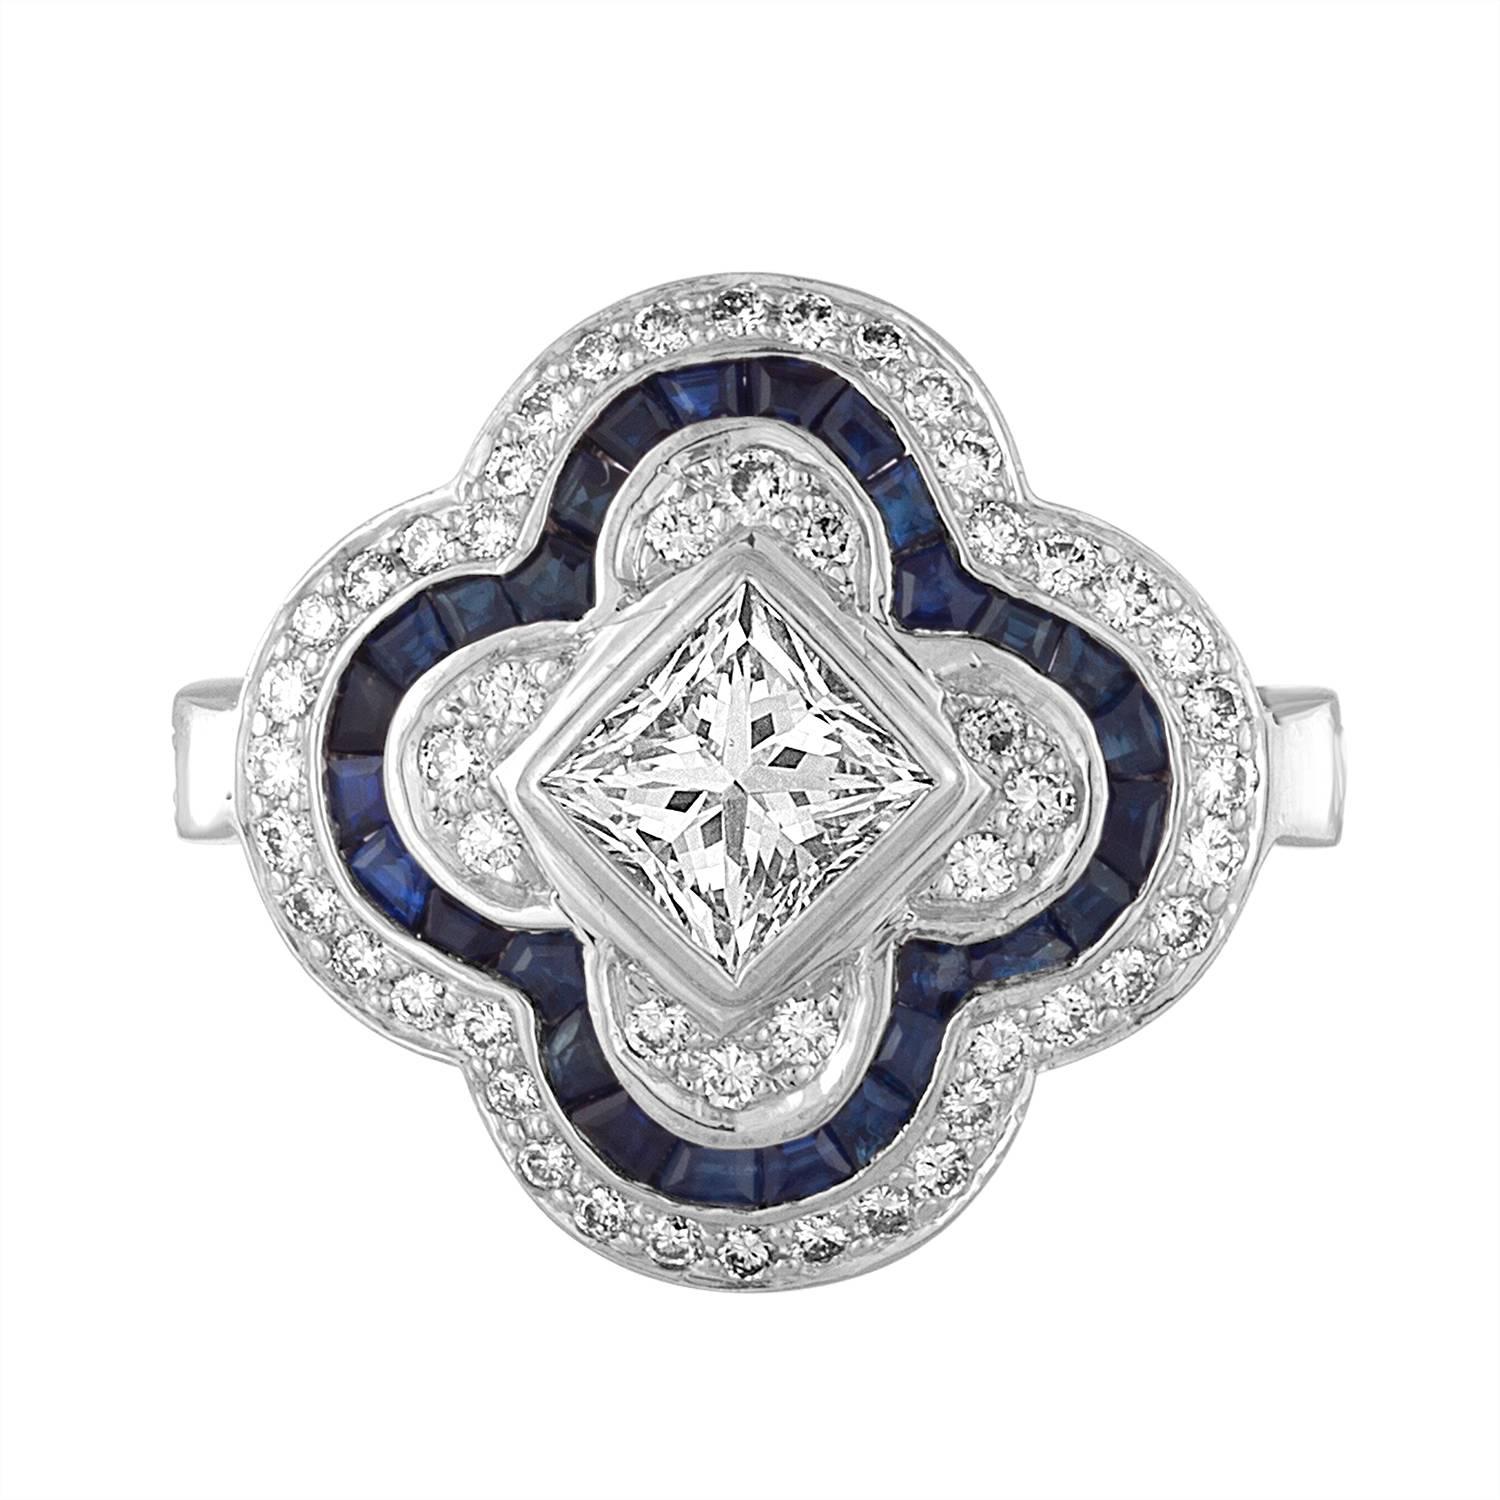 
Classic Combination of Blue Sapphires and White Diamonds. With Different Shapes of Diamonds and Sapphires Creating this Beautiful Flower Ring. 
The Center Diamond is approximate 6mm x 7mm Princess cut Diamond, Estimated to be 1.50 Carat Total